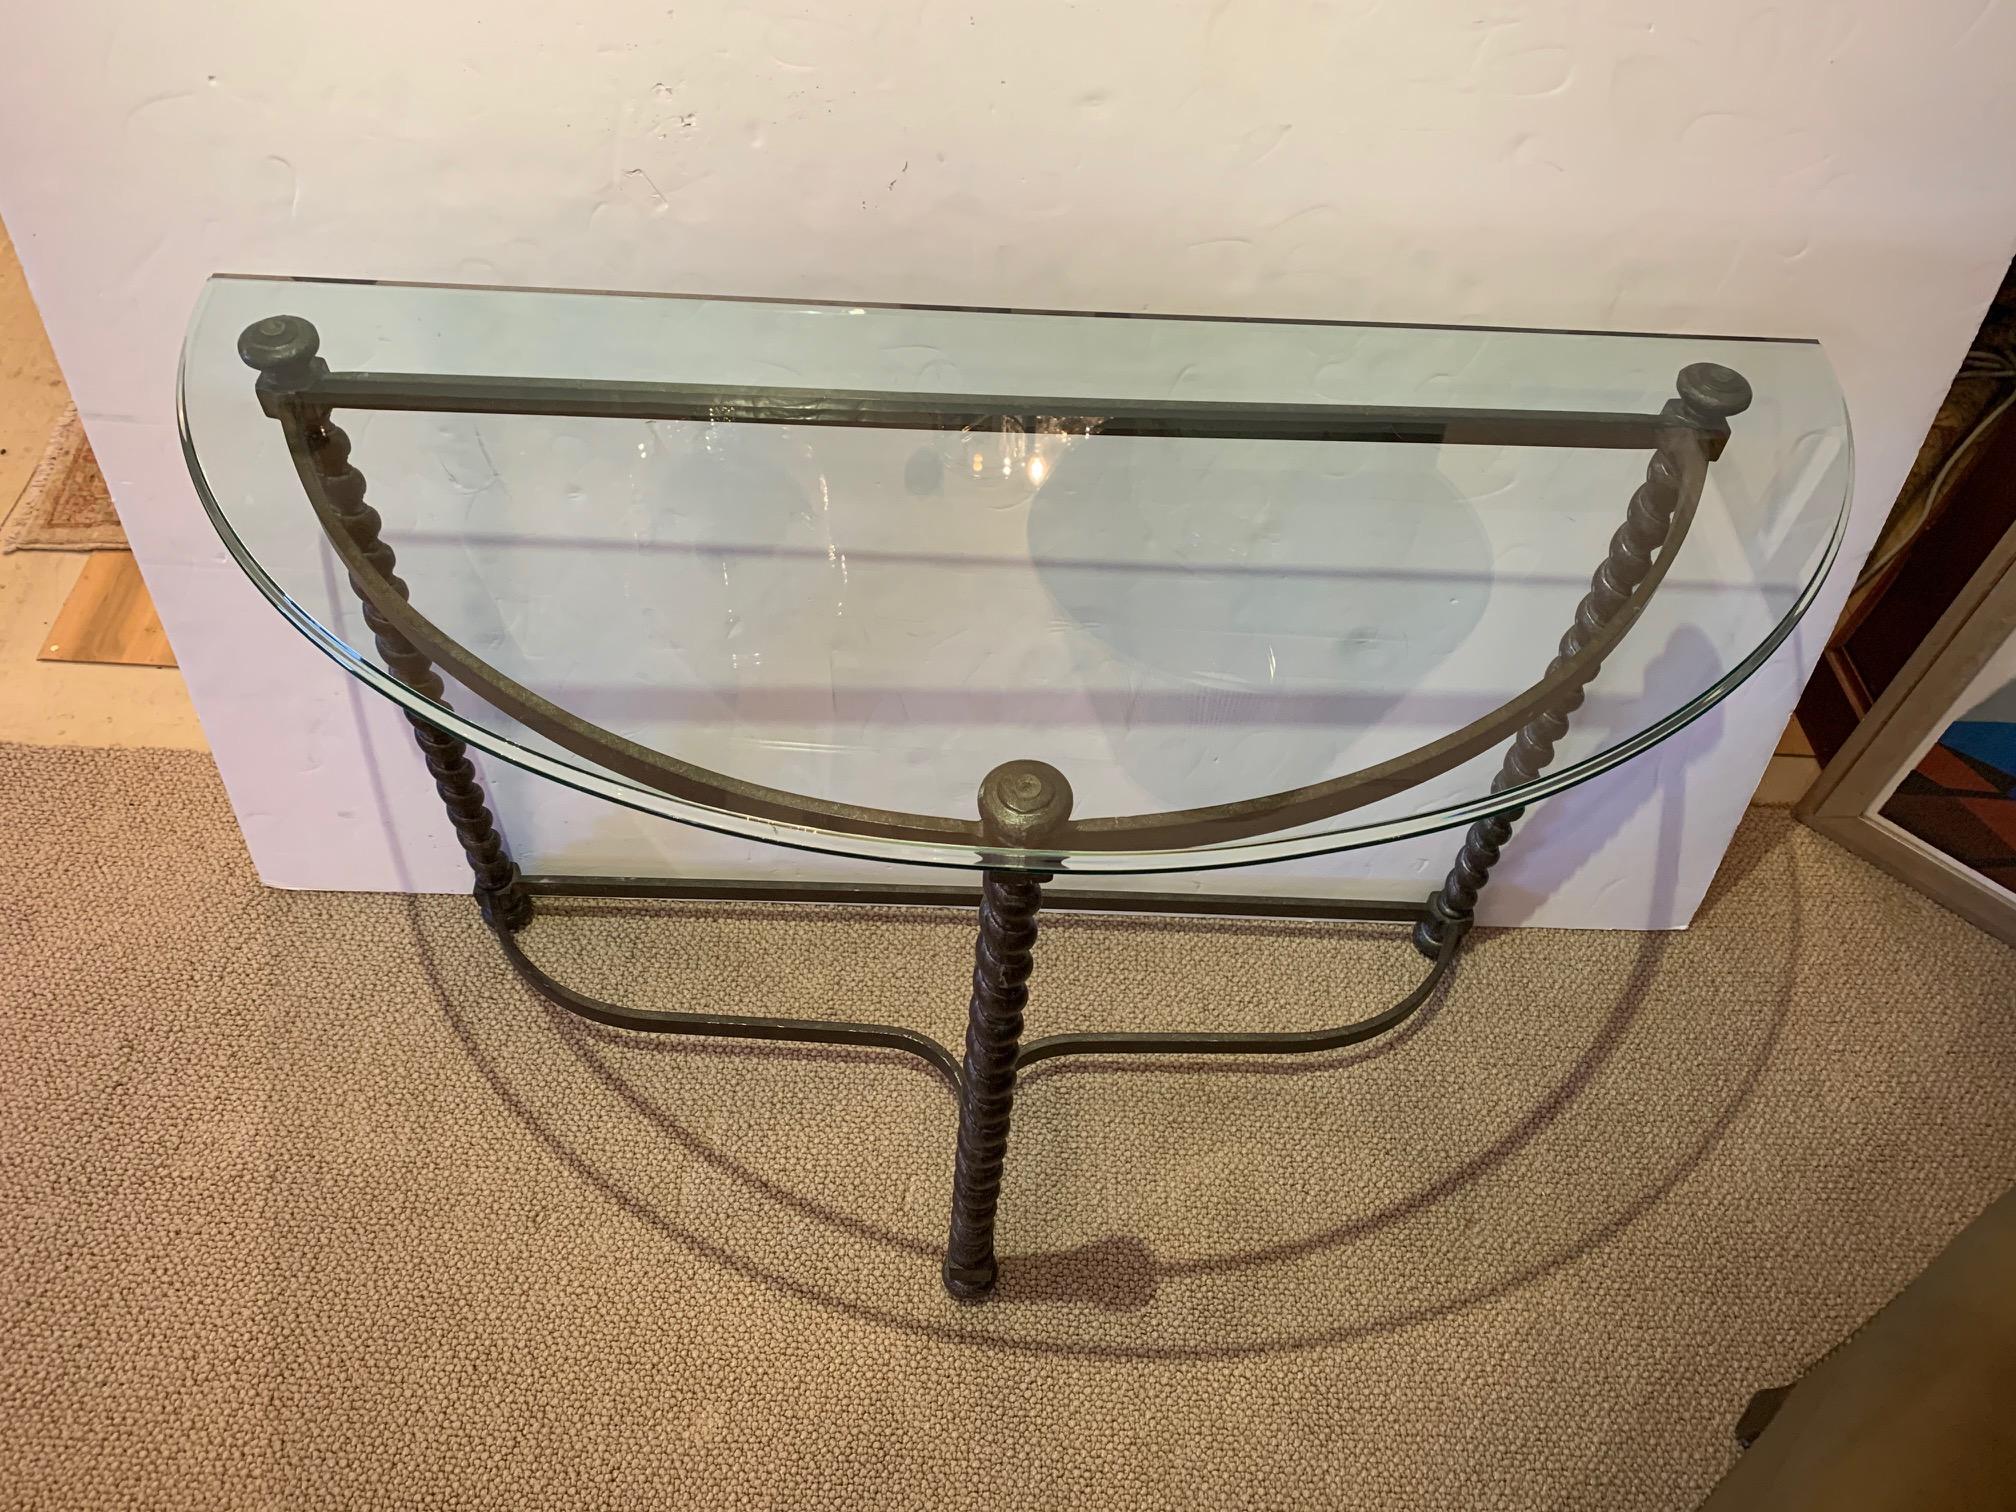 A very versatile handsome crescent shaped console table having dark iron base with 3 barley twist legs, ball tops and feet, and substantial beveled glass top.